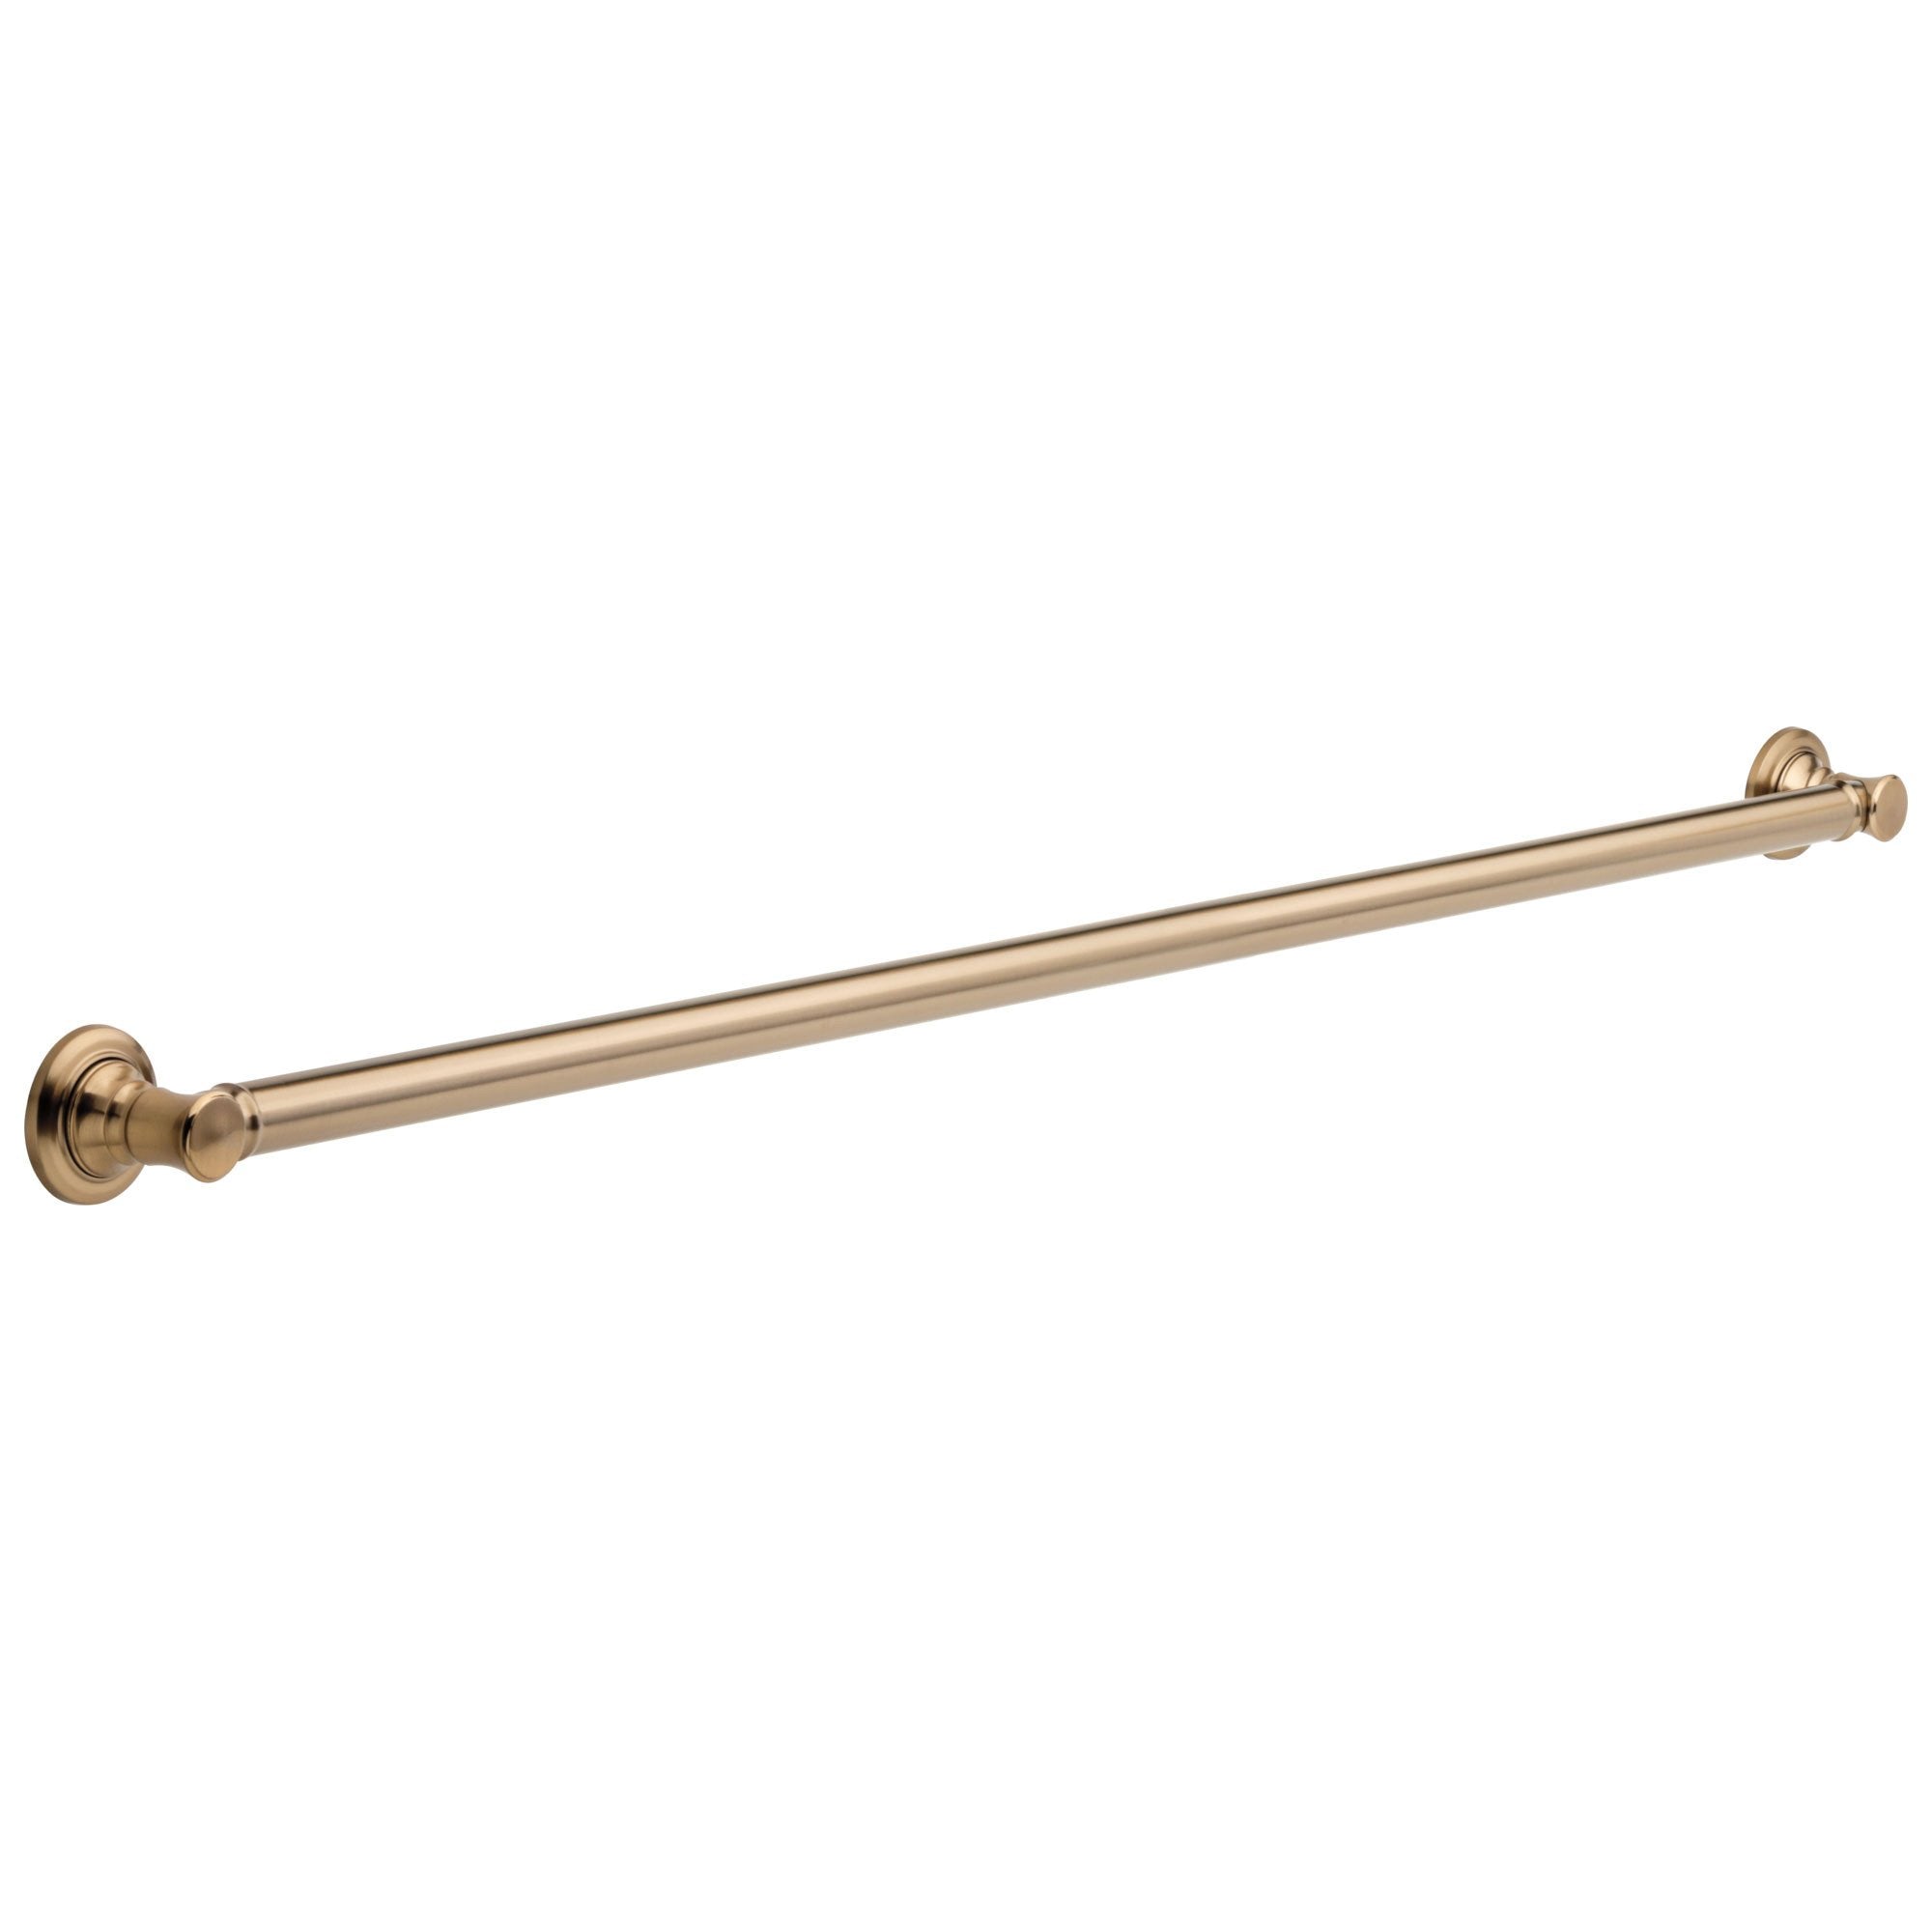 Delta Bath Safety Collection Champagne Bronze Finish Traditional Style Decorative ADA Grab Bar / Towel Bar for Shower or Bathroom - 42" D41642CZ